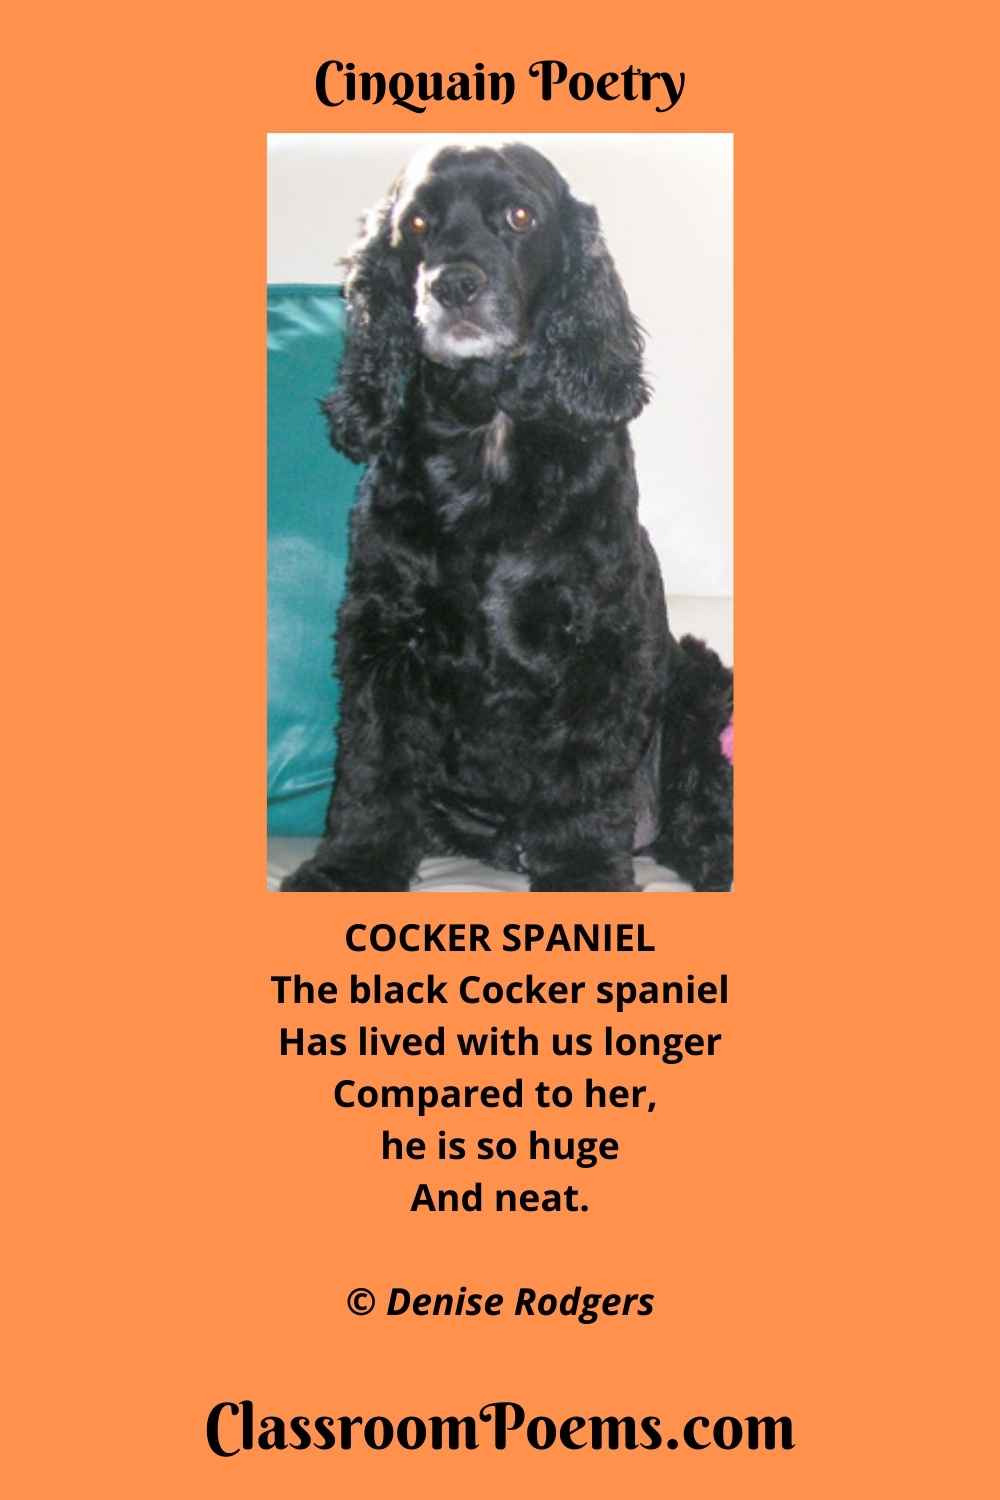 COCKER SPANIEL Cinquain Poem by the Poetry Lady Denise Rodgers on ClassroomPoems.com.